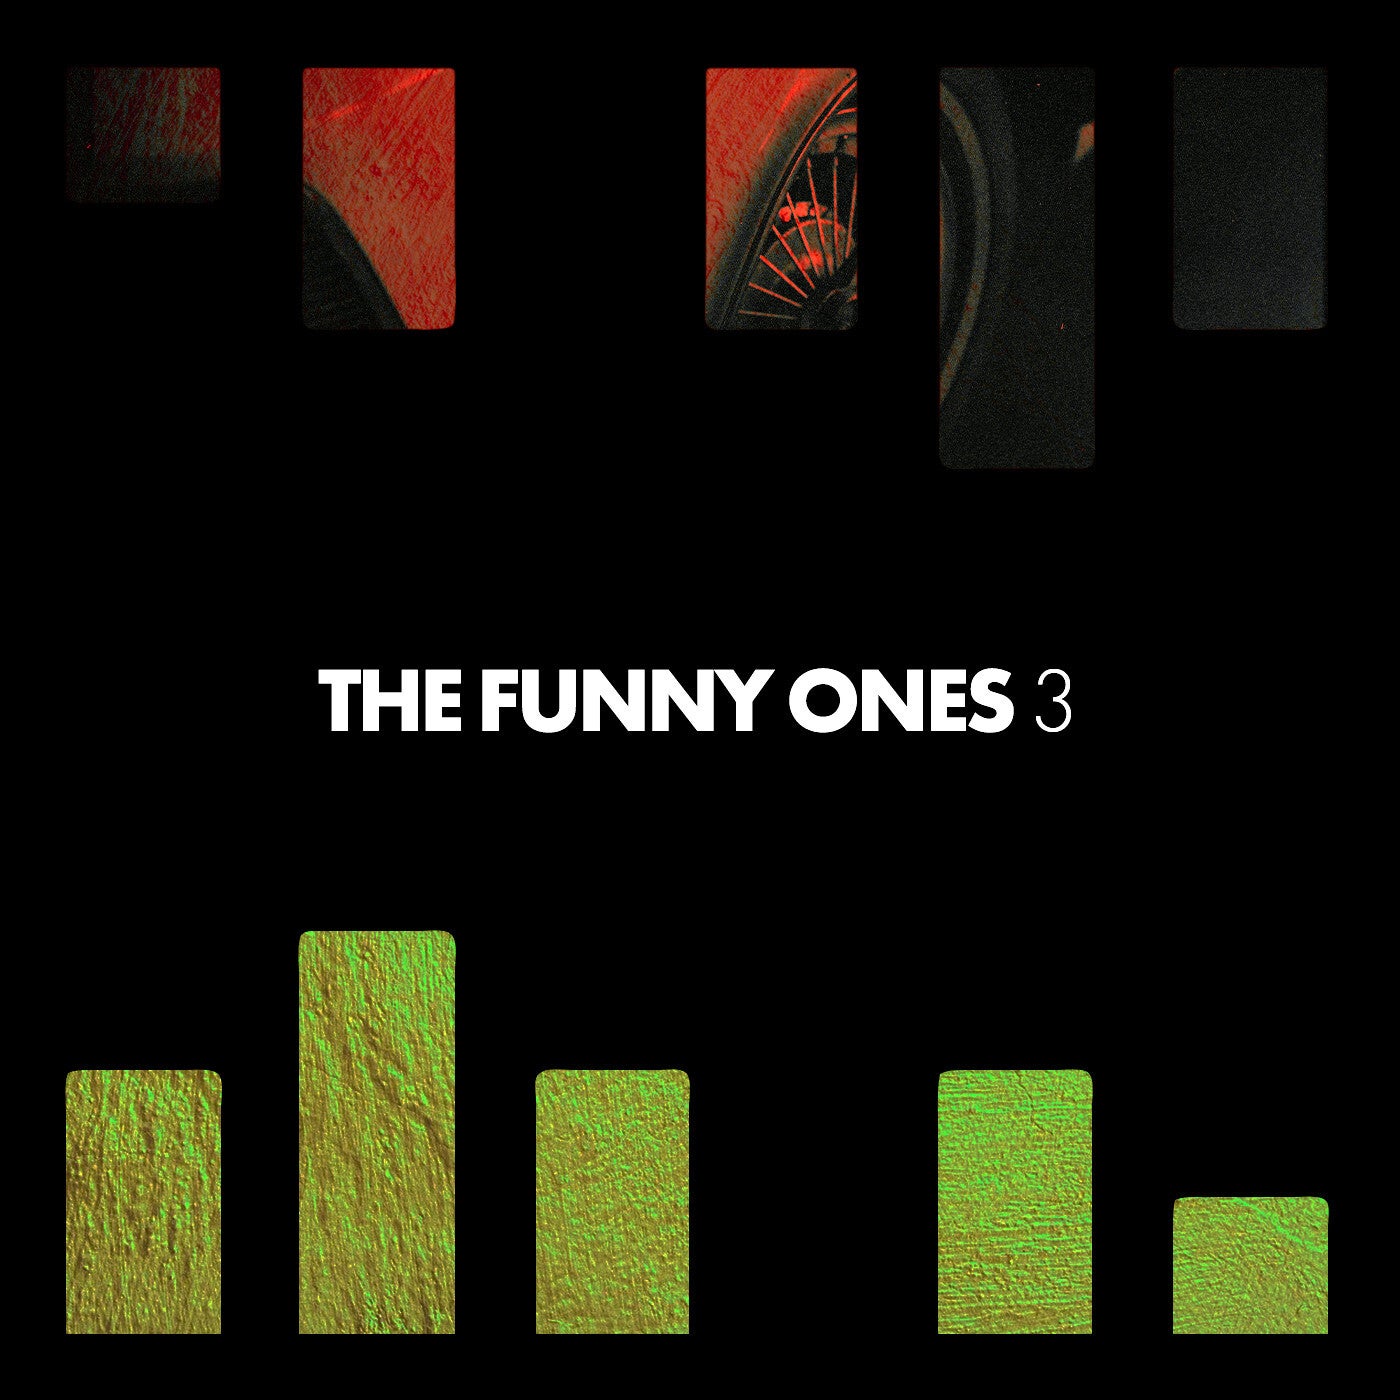 The Funny Ones 3